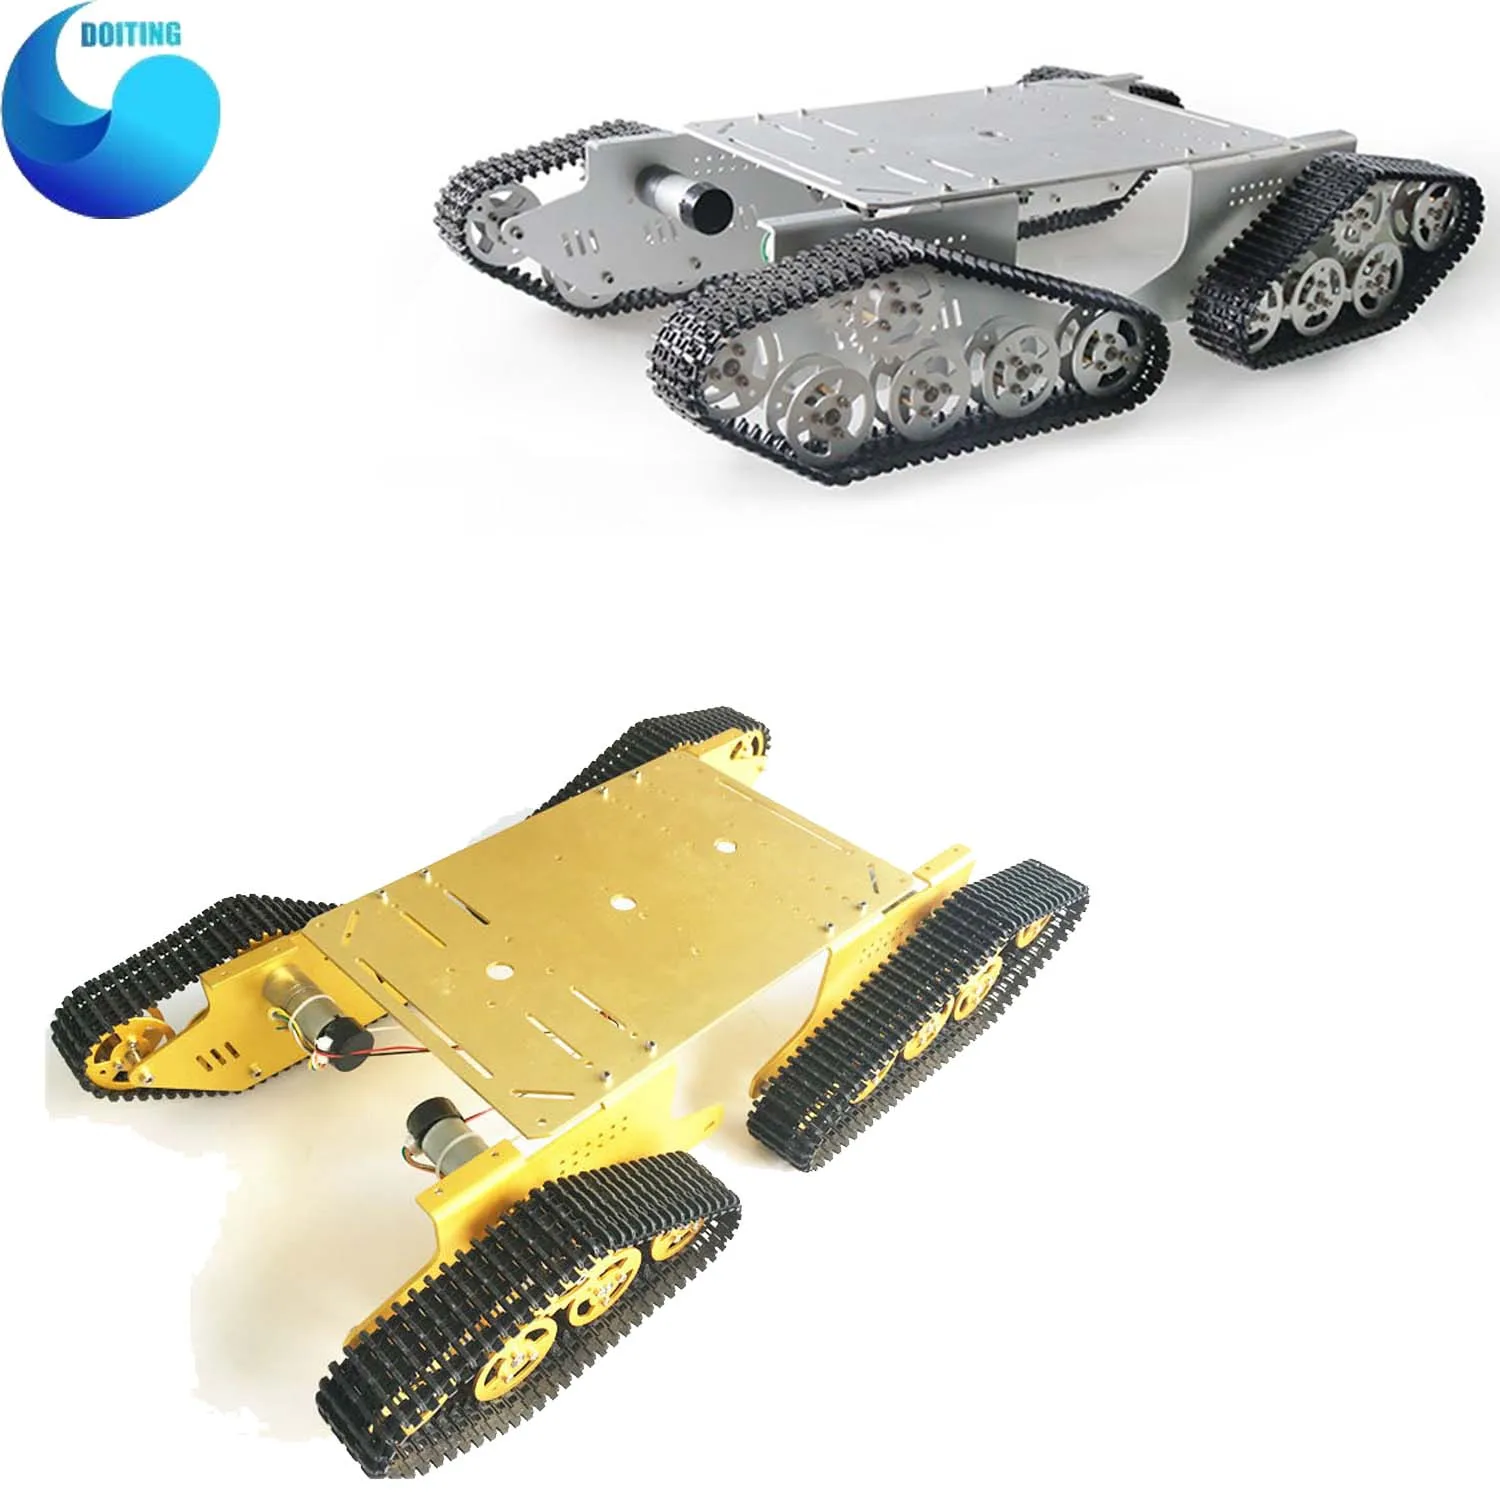 

DOIT 4WD Metal Robot Tank Tracked Chassis with 4 Motor Aluminum Alloy Frame Controlled by Arduino by APP Phone RC Remote Control